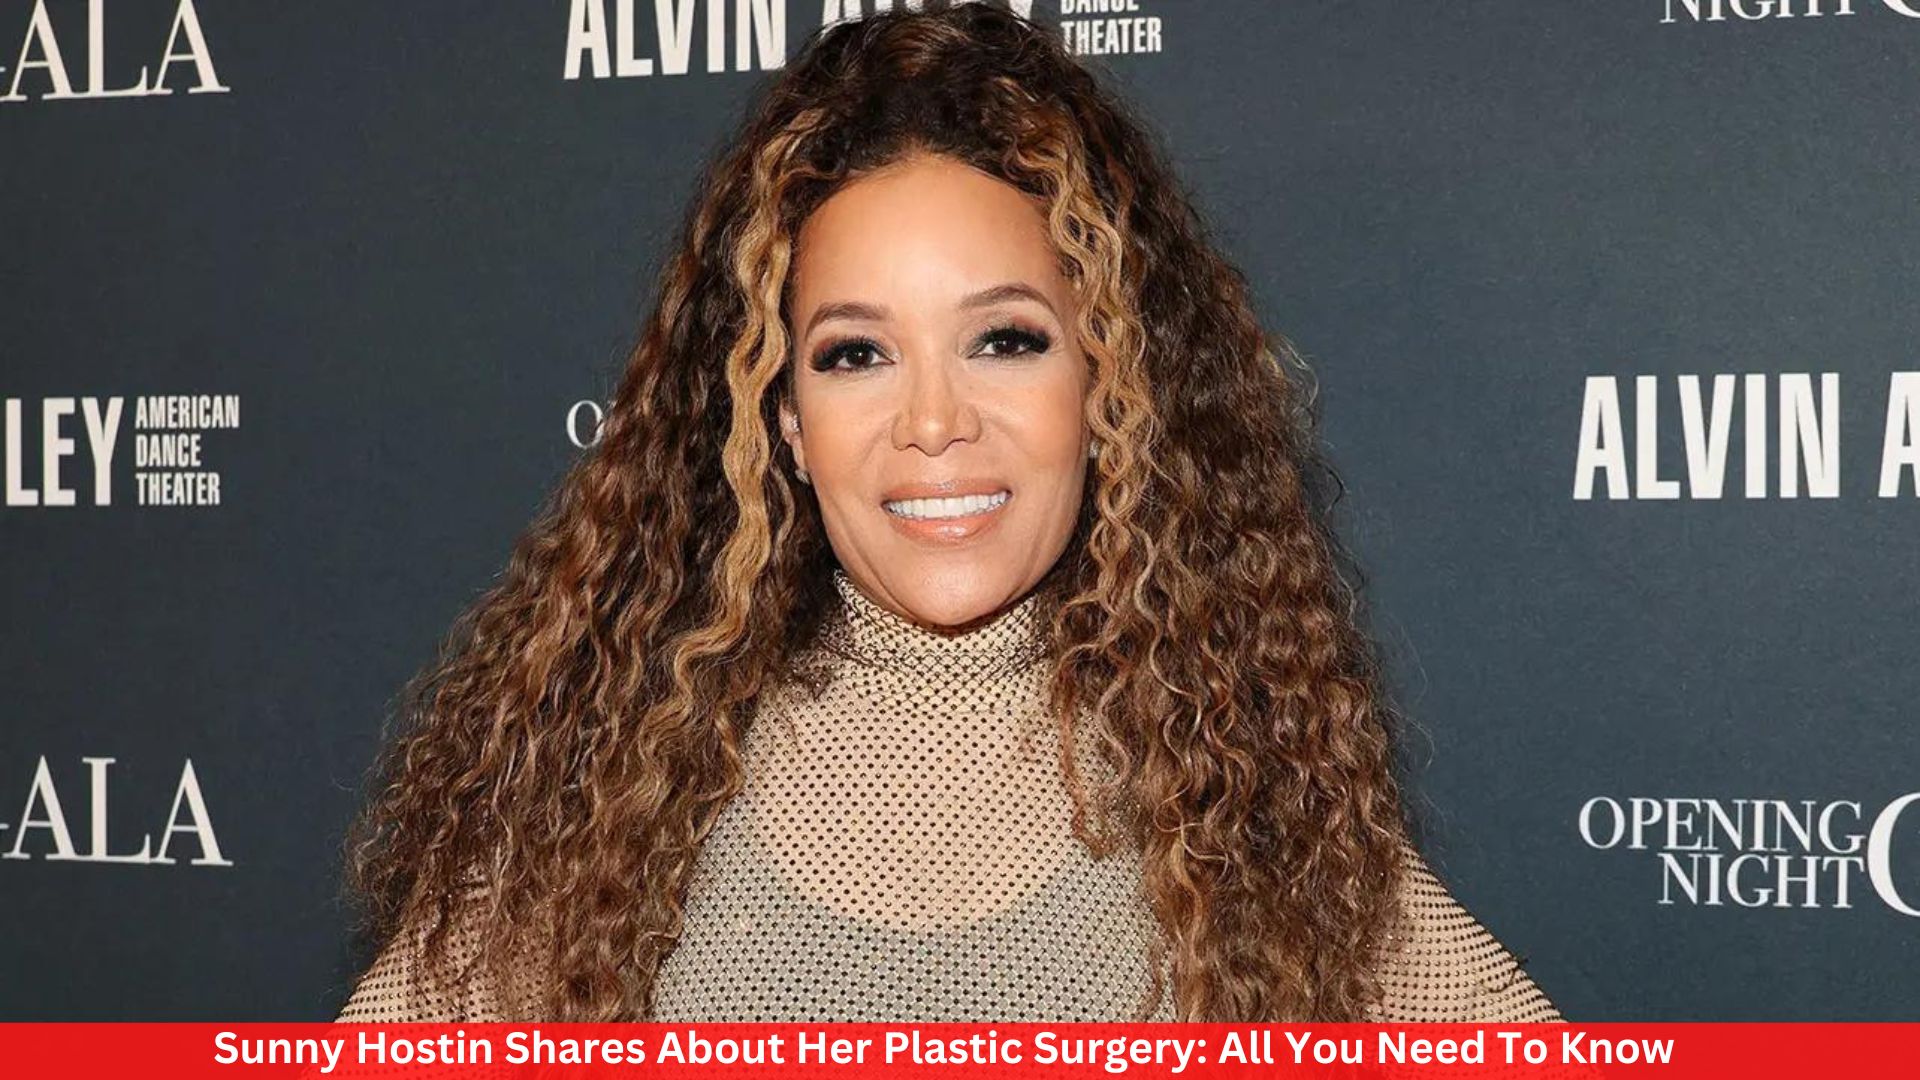 Sunny Hostin Shares About Her Plastic Surgery: All You Need To Know